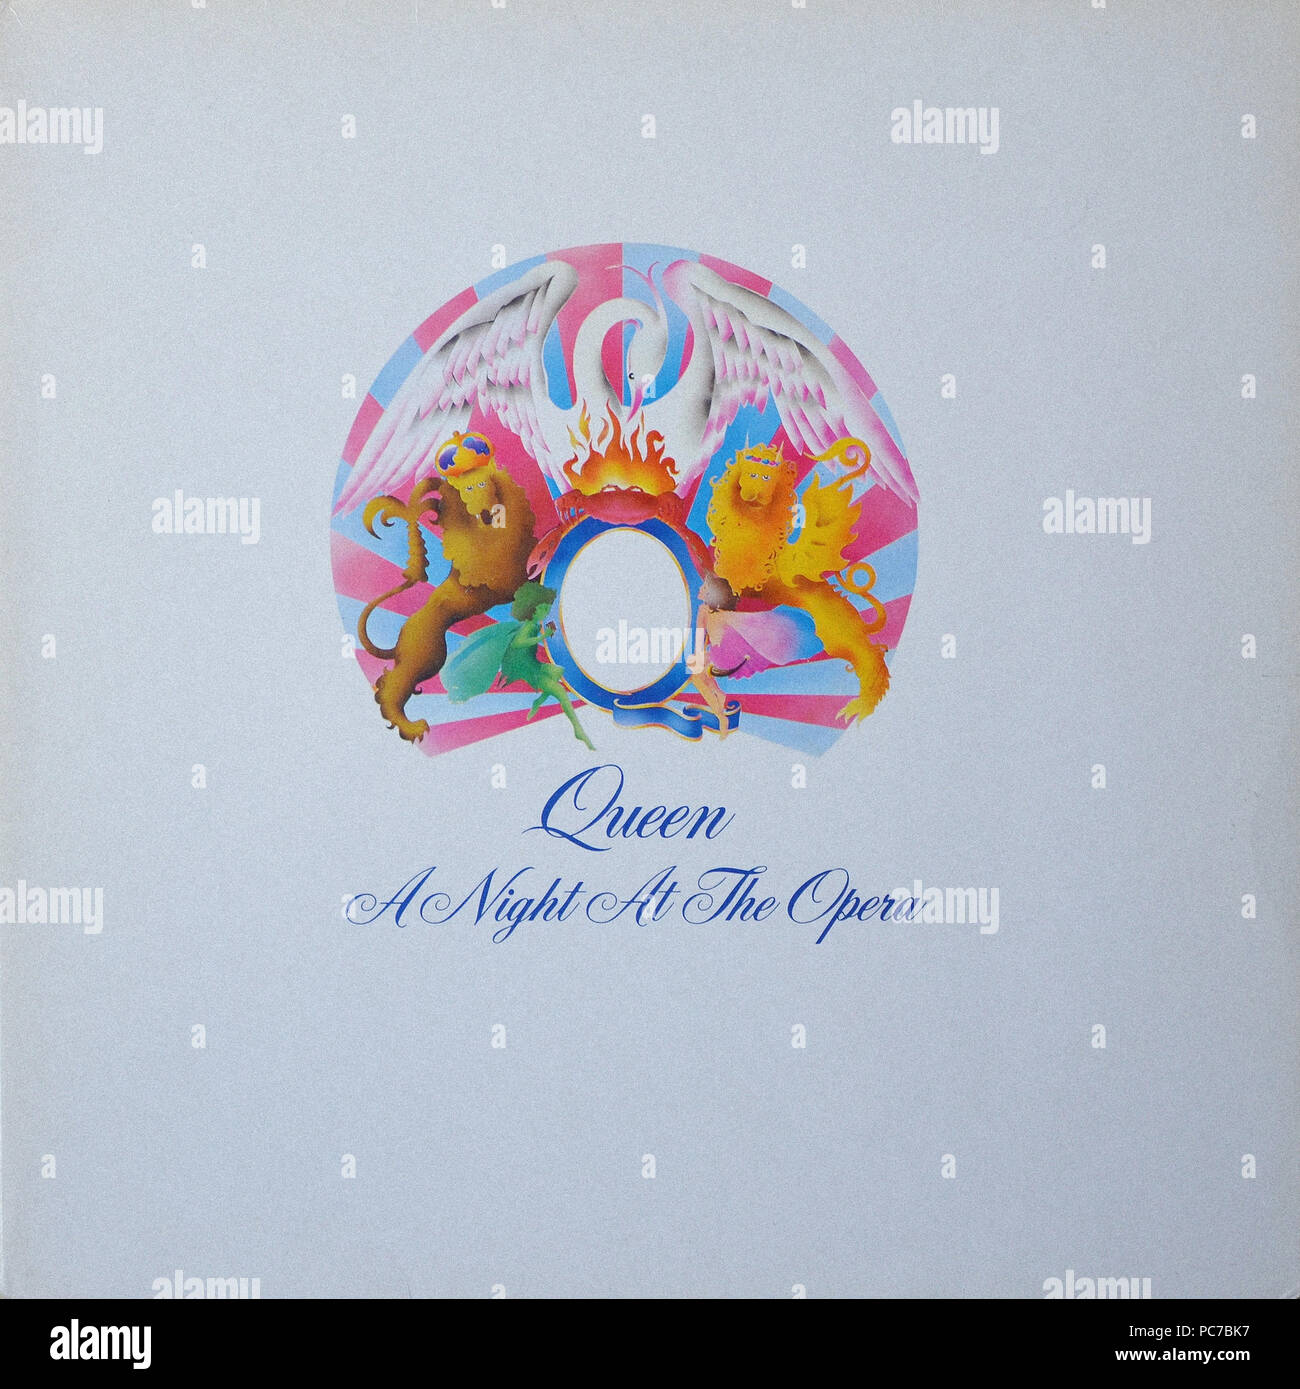 Queen   -  A Night At The Opera  -  Vintage vinyl album cover Stock Photo